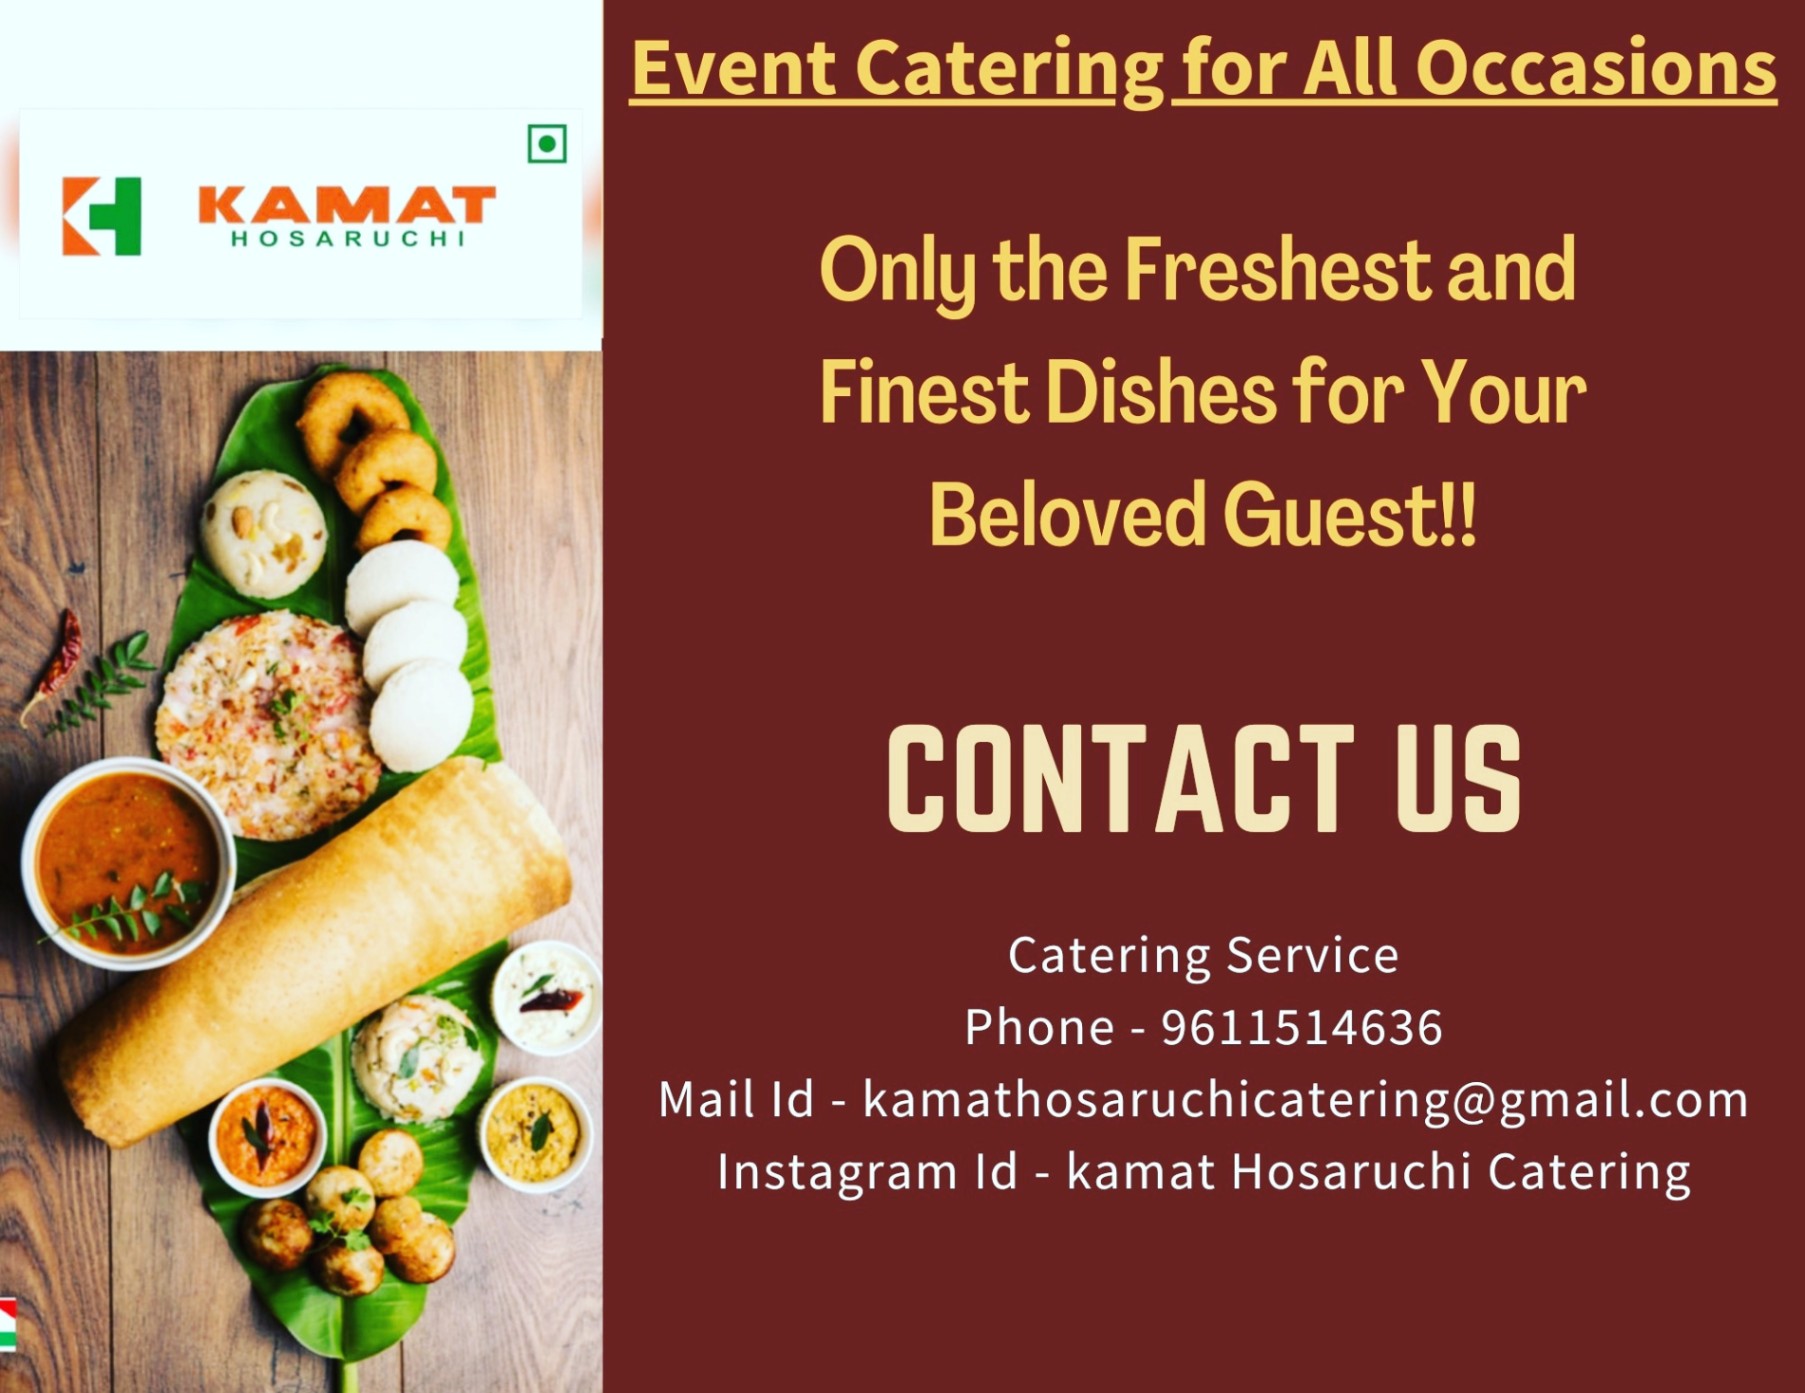 Corporate Catering, Wedding Catering; Exp: More than 15 year